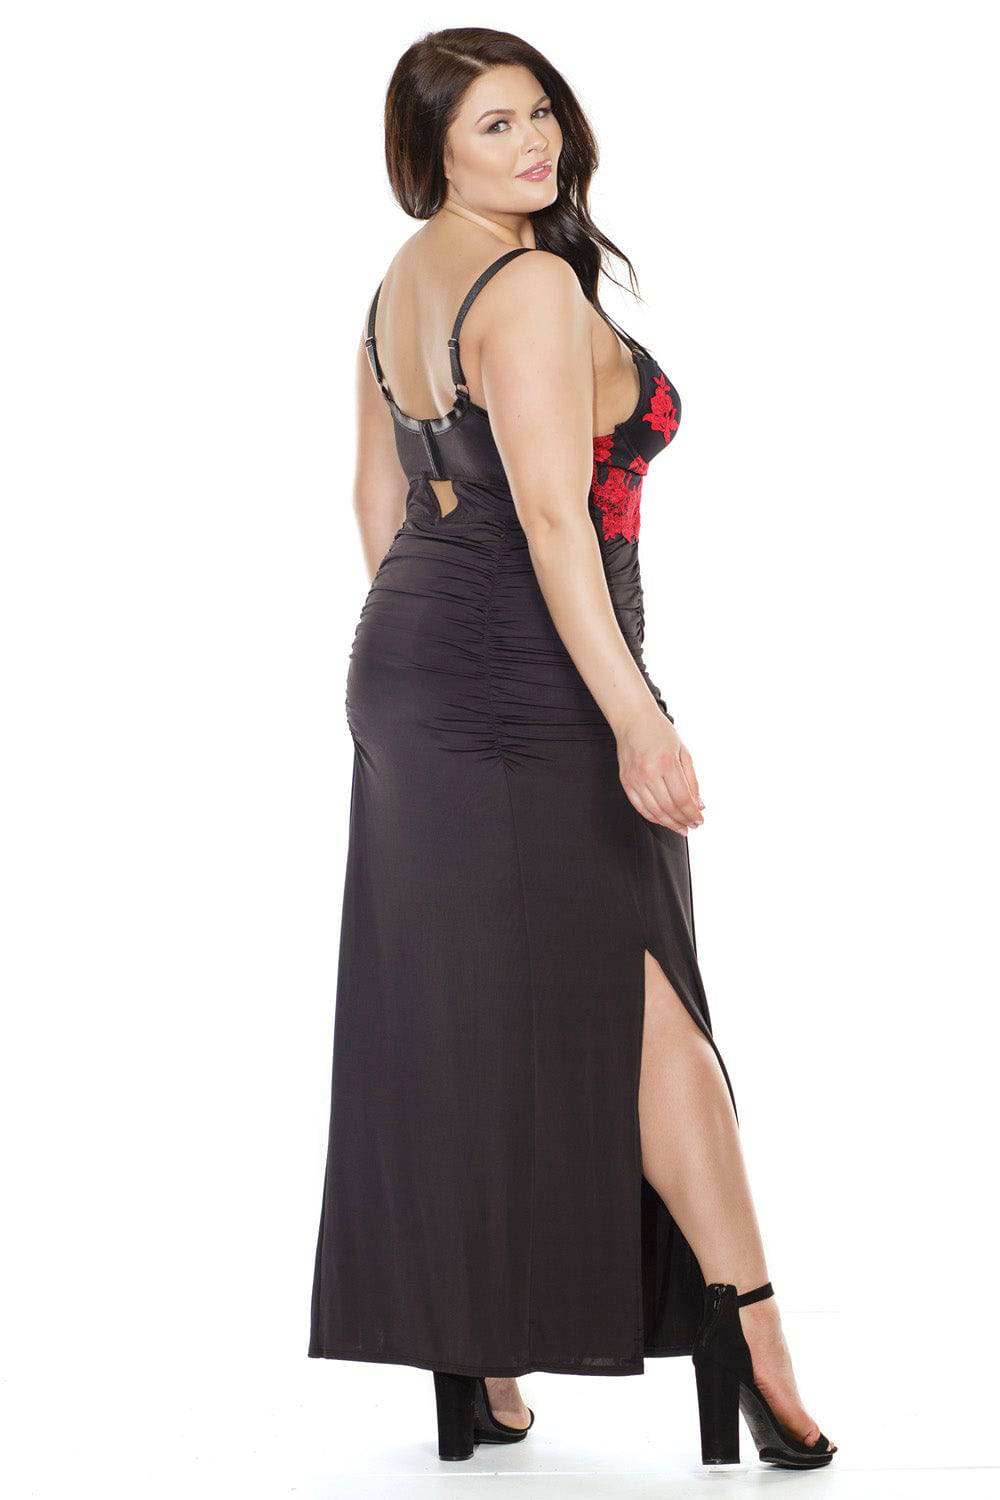 Coquette - 3870X - Plus Size Embroidered Gown - Black/Red - Stag Shop